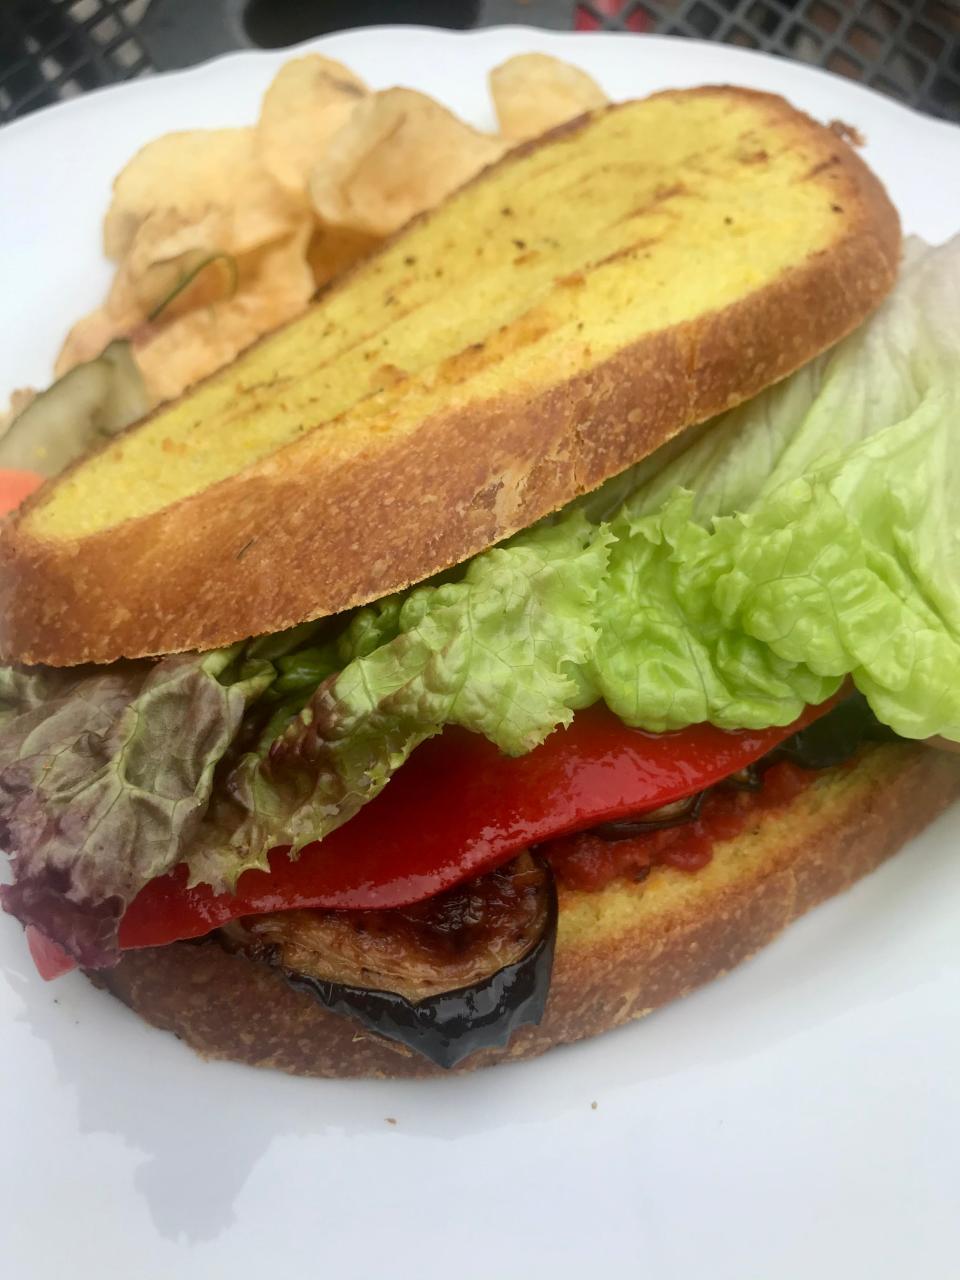 The Veggiewich from Ruta's in Crossroads Collective on the east side combines roasted red pepper and eggplant, lettuce and tomato chutney on the restaurant's own turmeric bread.